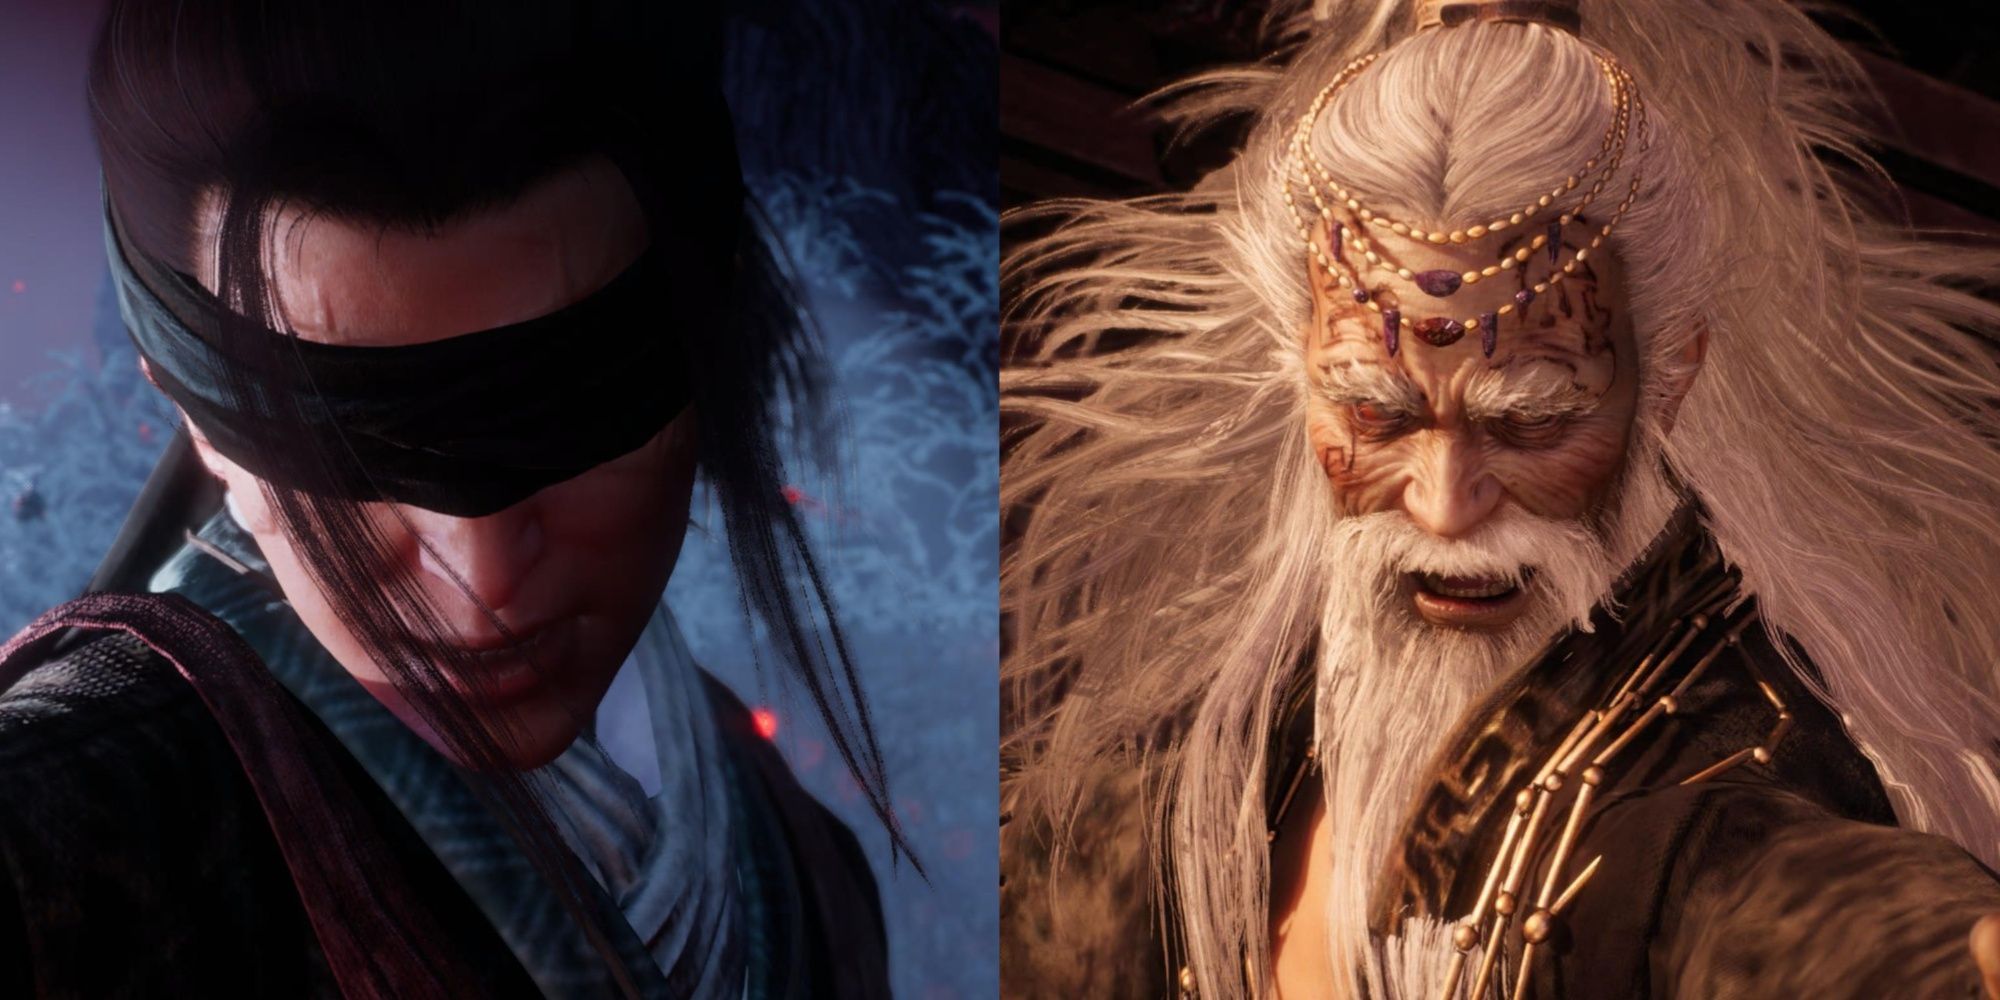 Wo Long: Fallen Dynasty - Yu Ji (right) and the Blindfolded Boy (left) during cutscenes